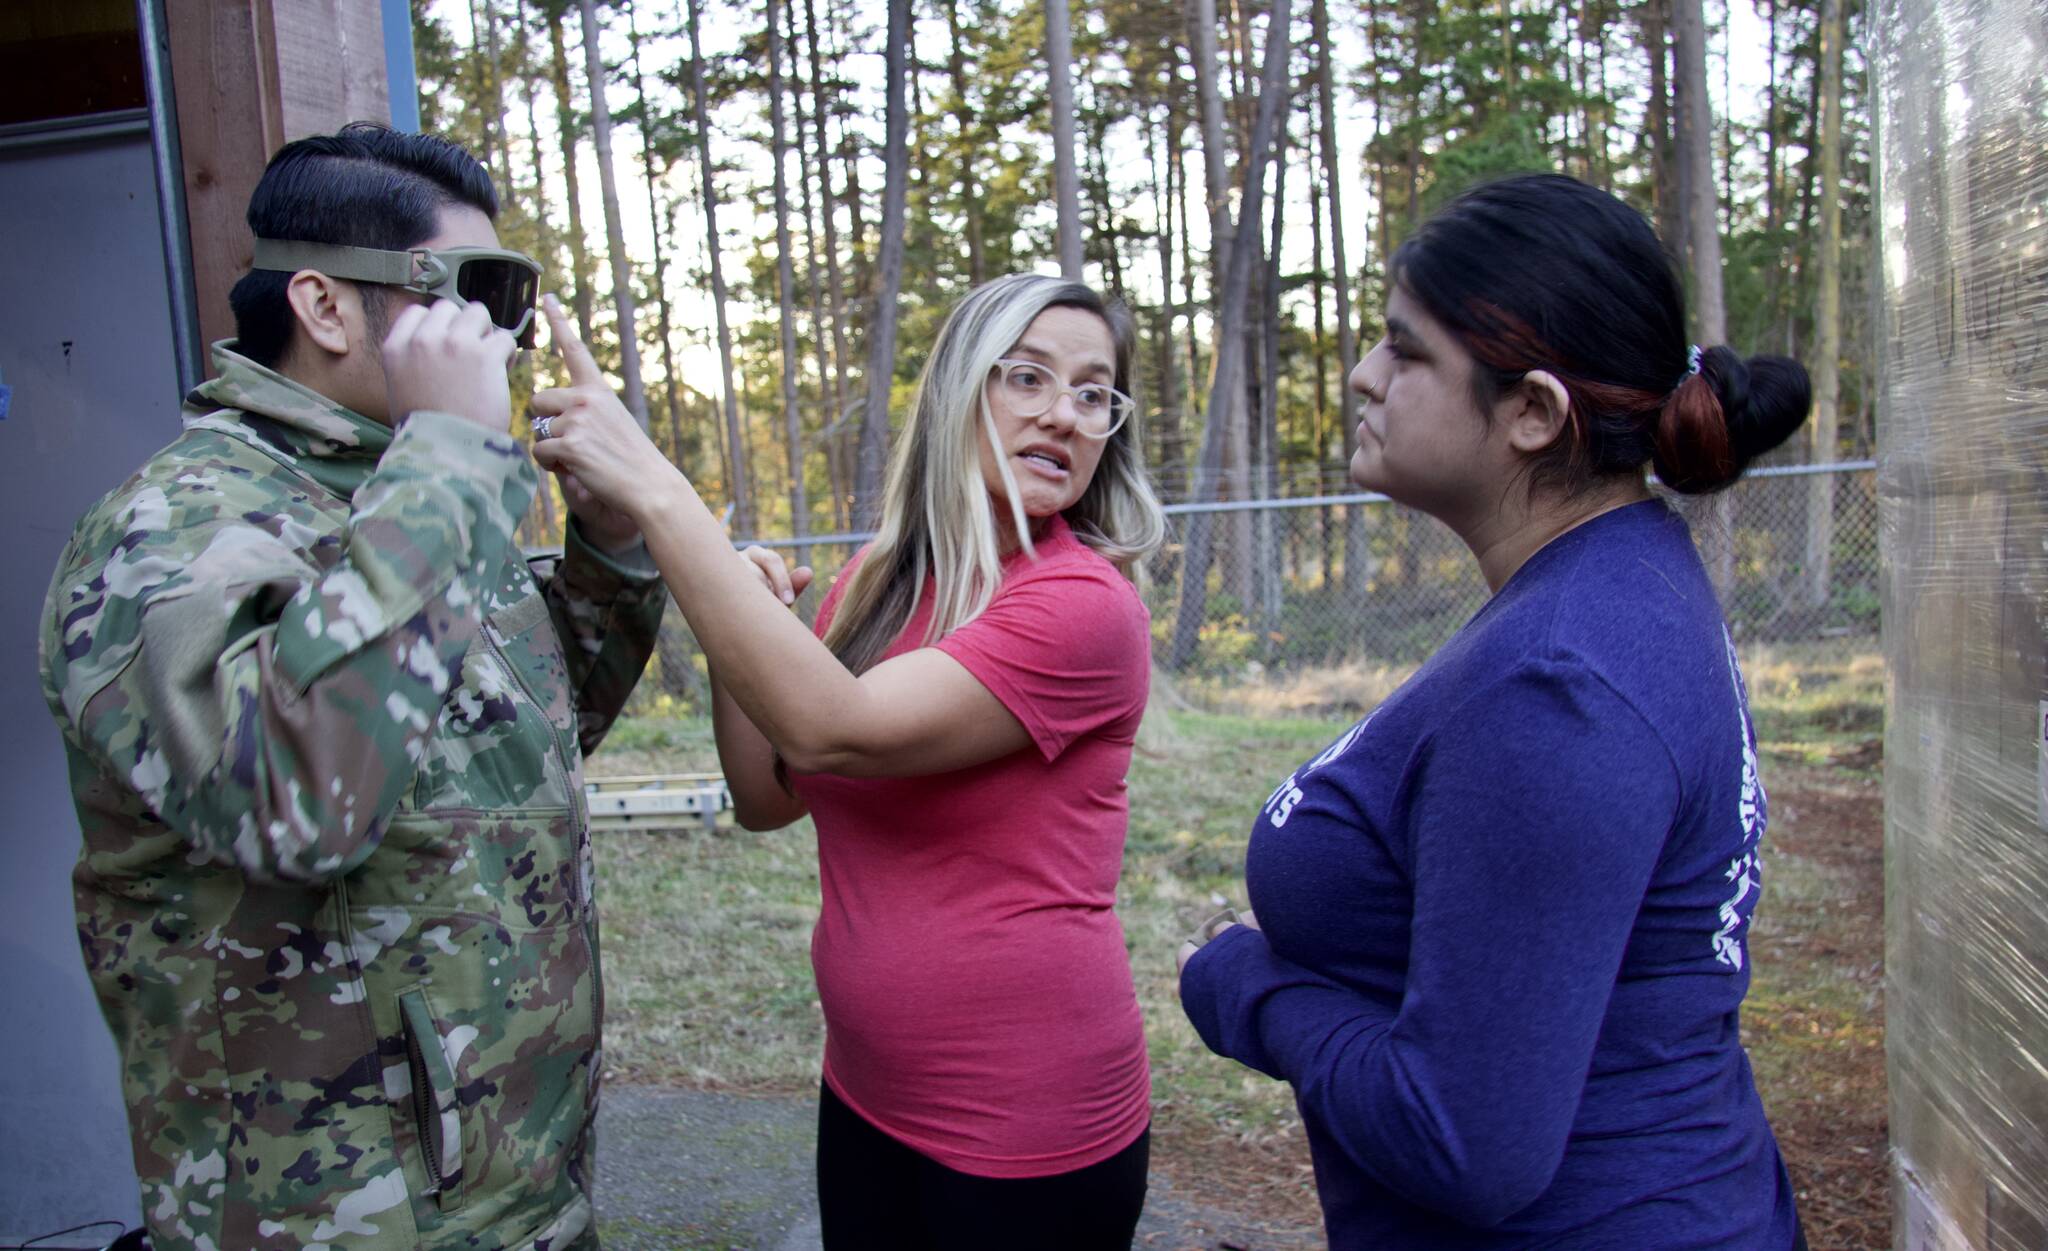 Photo by Rachel Rosen/Whidbey News-Times
Brittni Darbonnier and Julio Bucio show a pair of goggles to Justin Zafra.